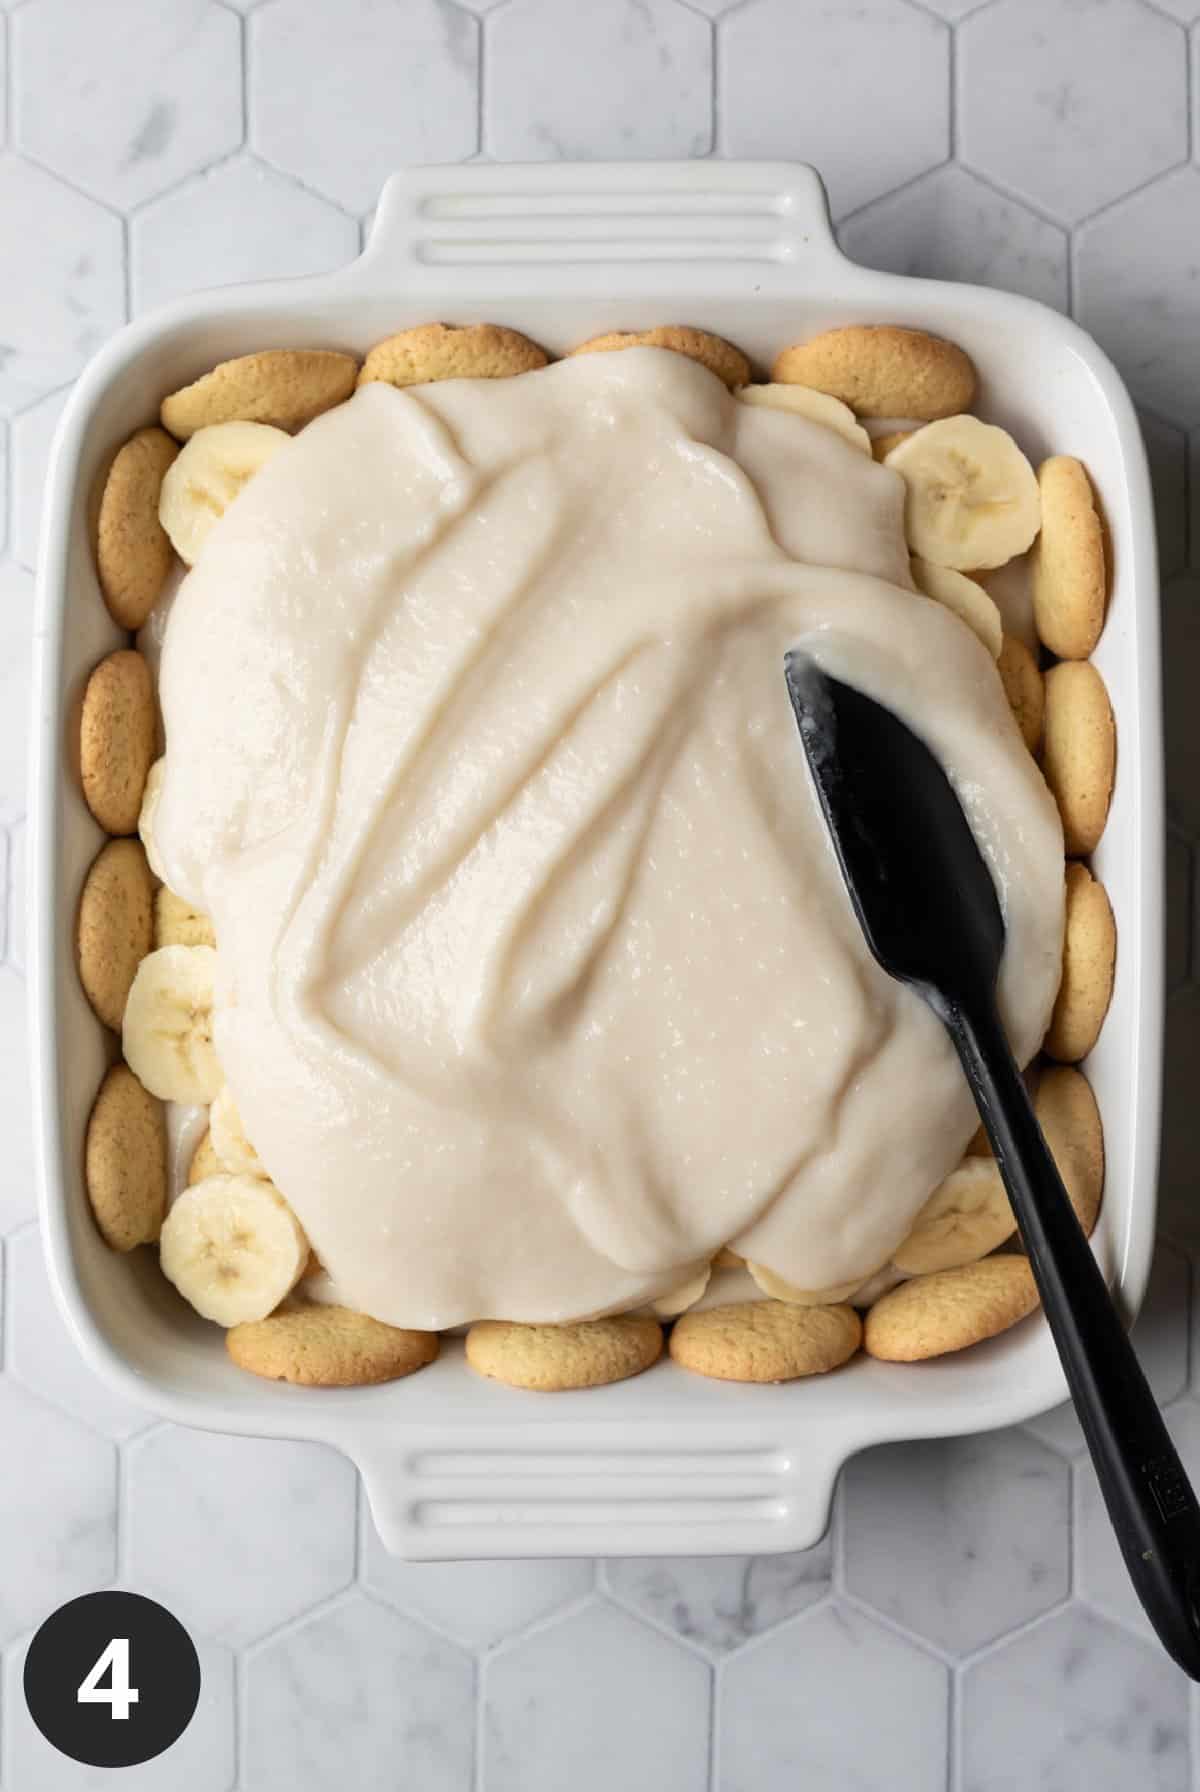 spreading the top layer of pudding over sliced bananas.